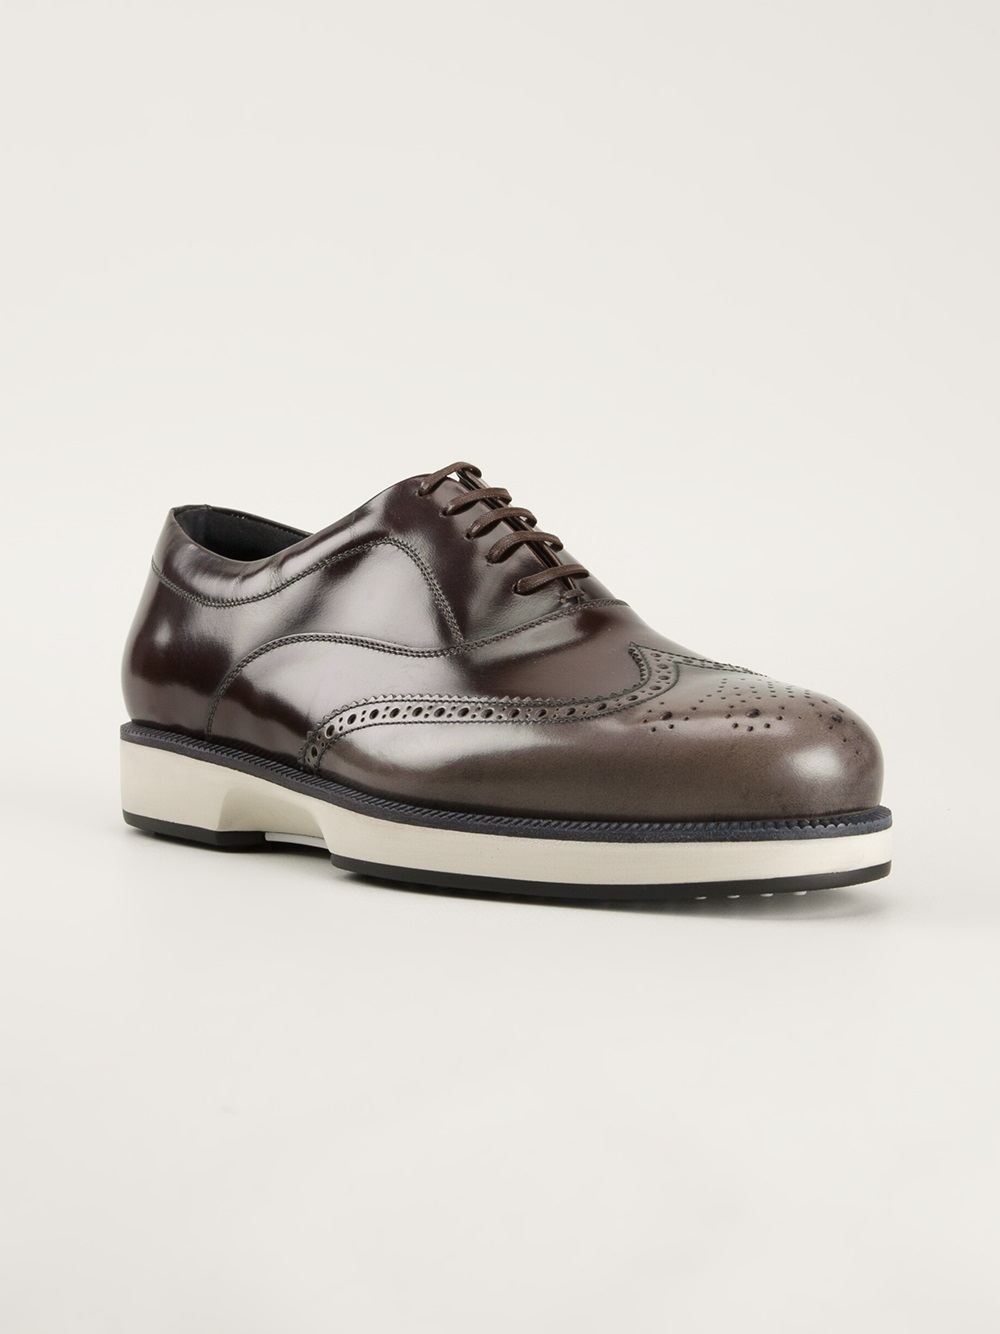 Lyst - Ferragamo Chunky Sole Brogues in Brown for Men